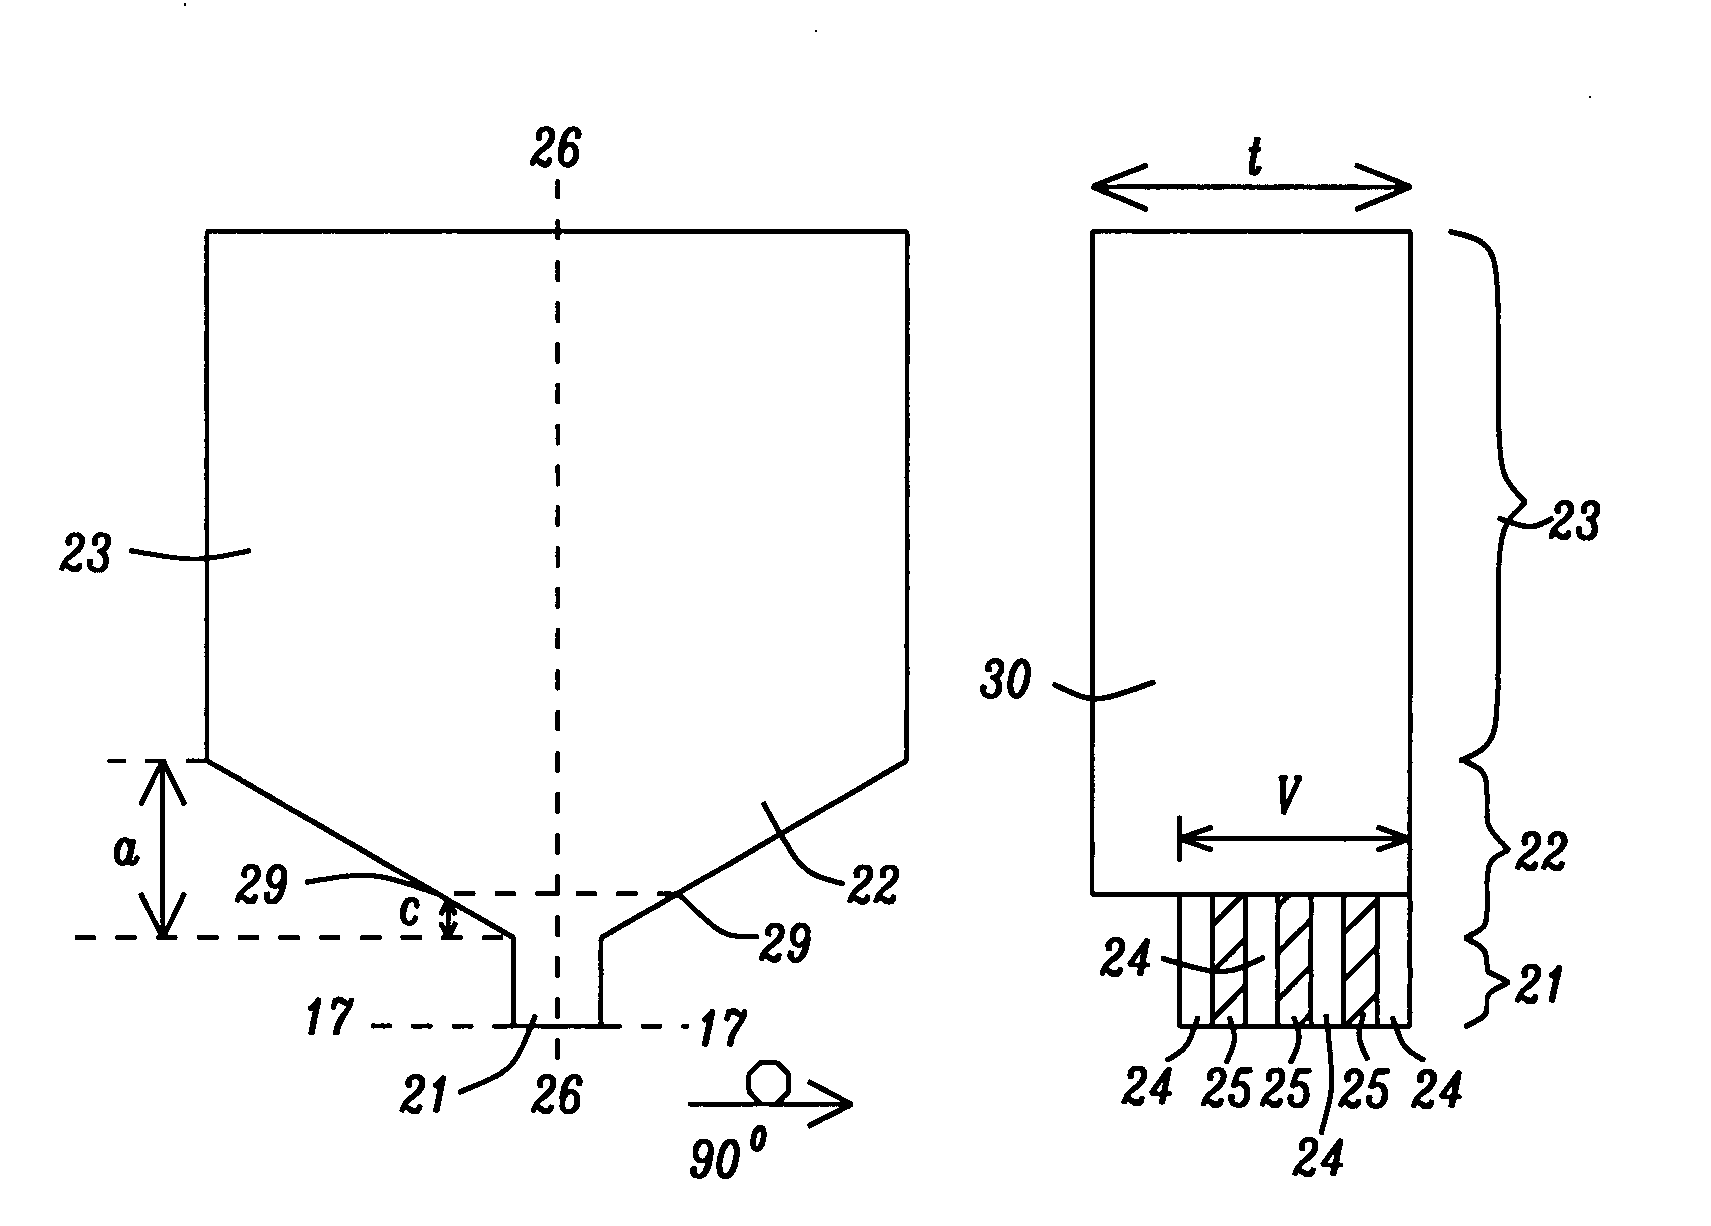 Perpendicular magnetic recording head laminated with AFM-FM phase change material